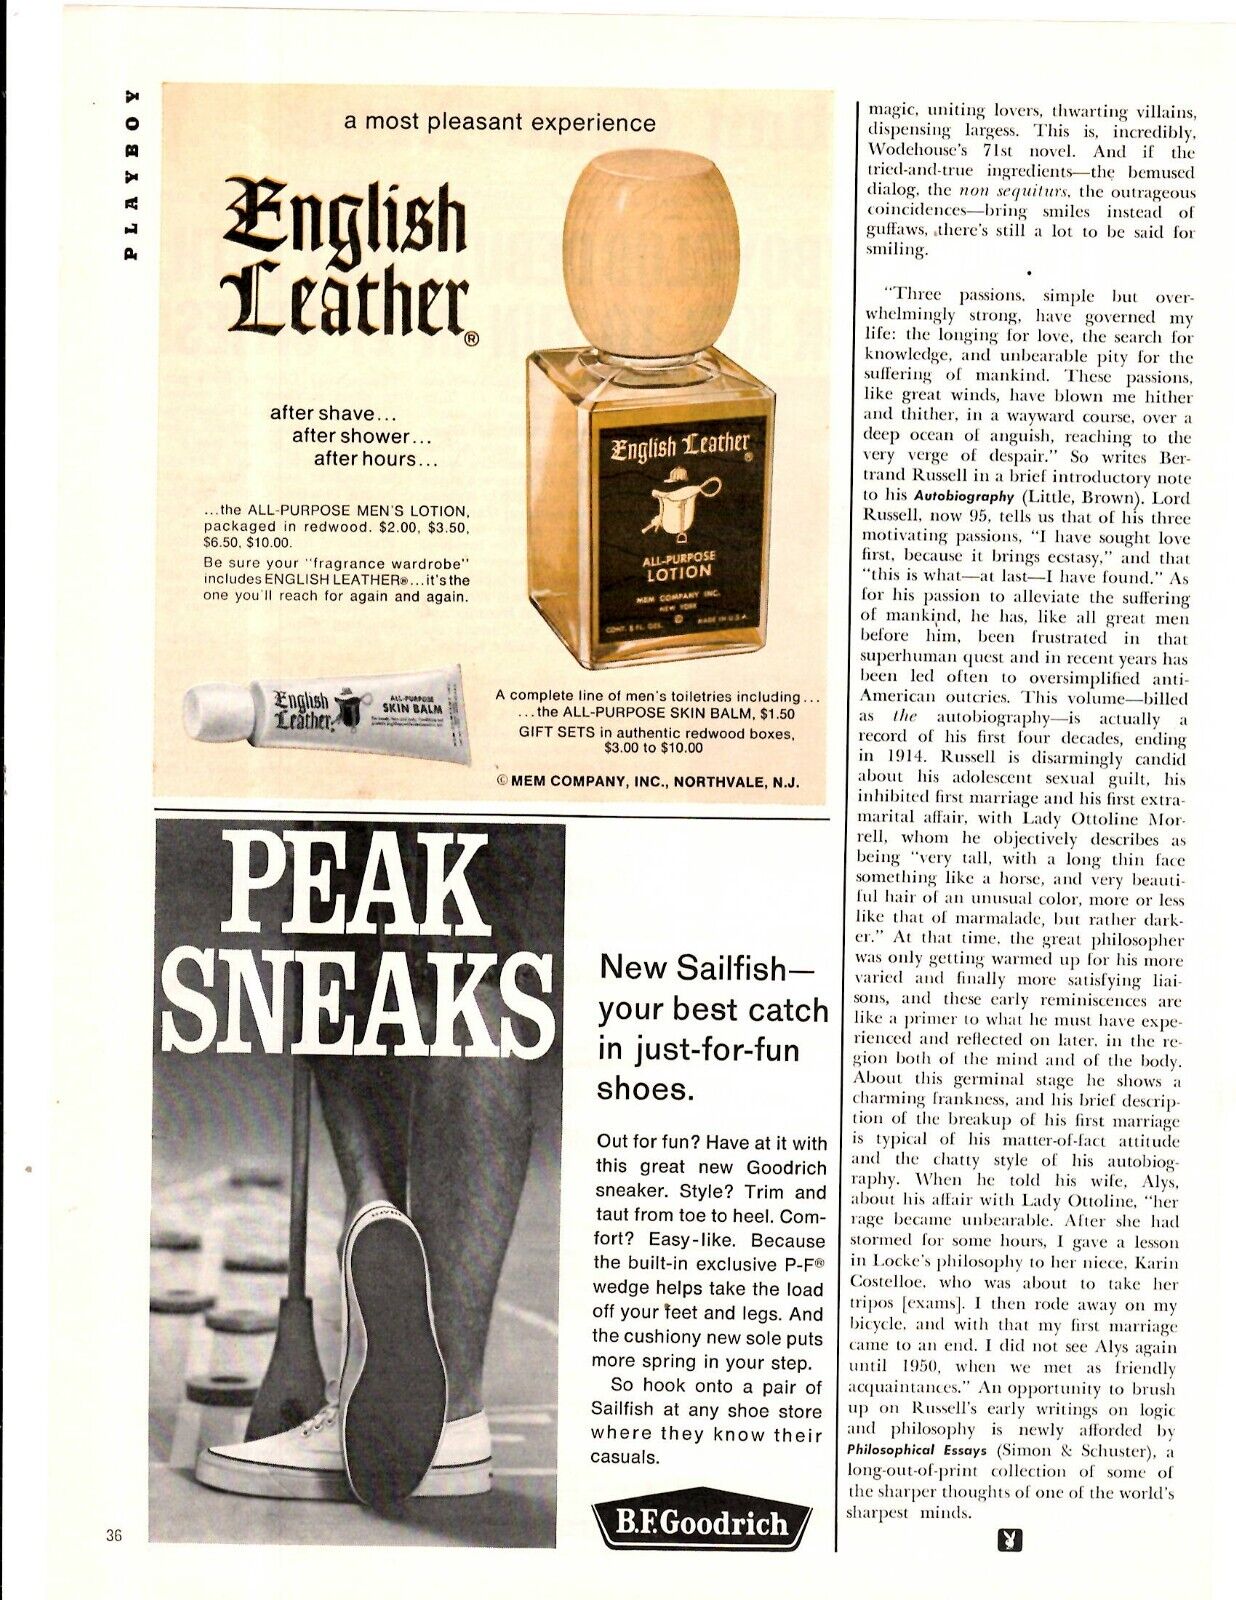 1967 Print Ad English Leather After Shave After Shower After Hours